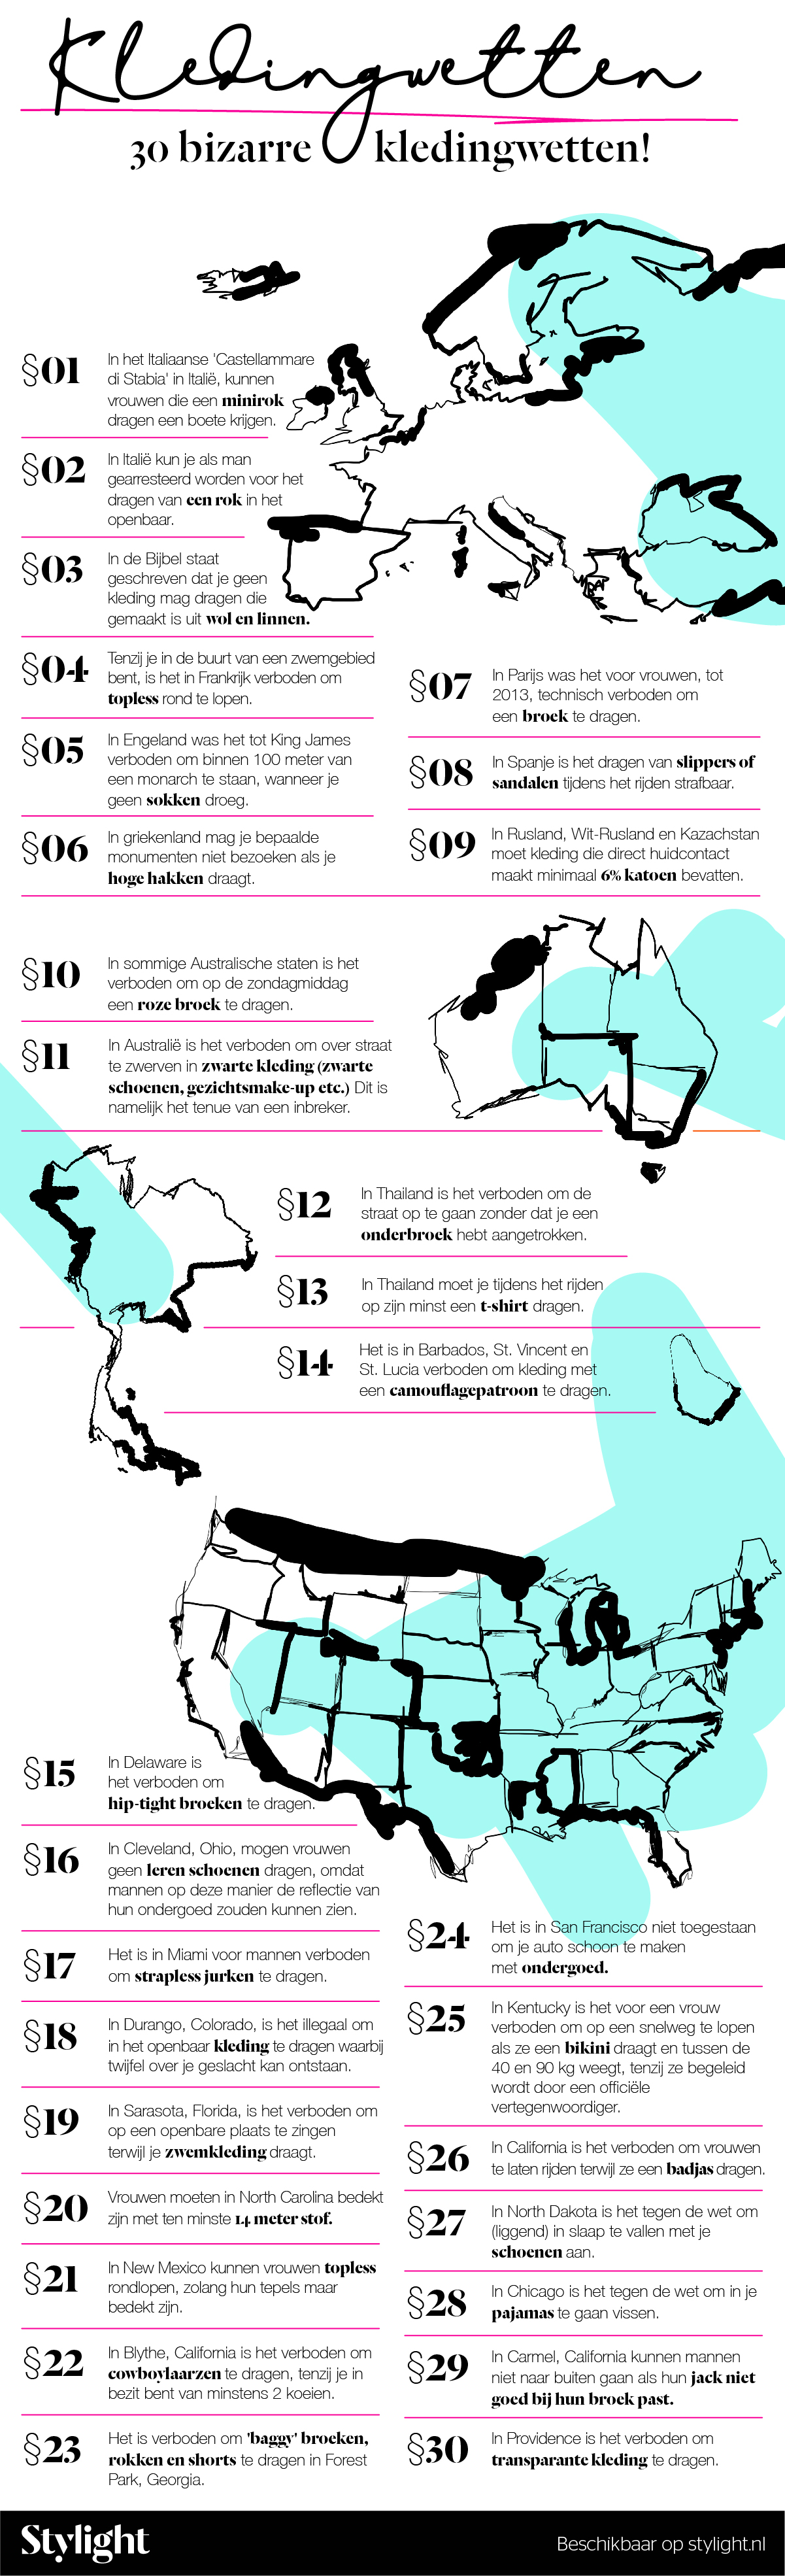 Fashion_Laws_Infographic_NL_